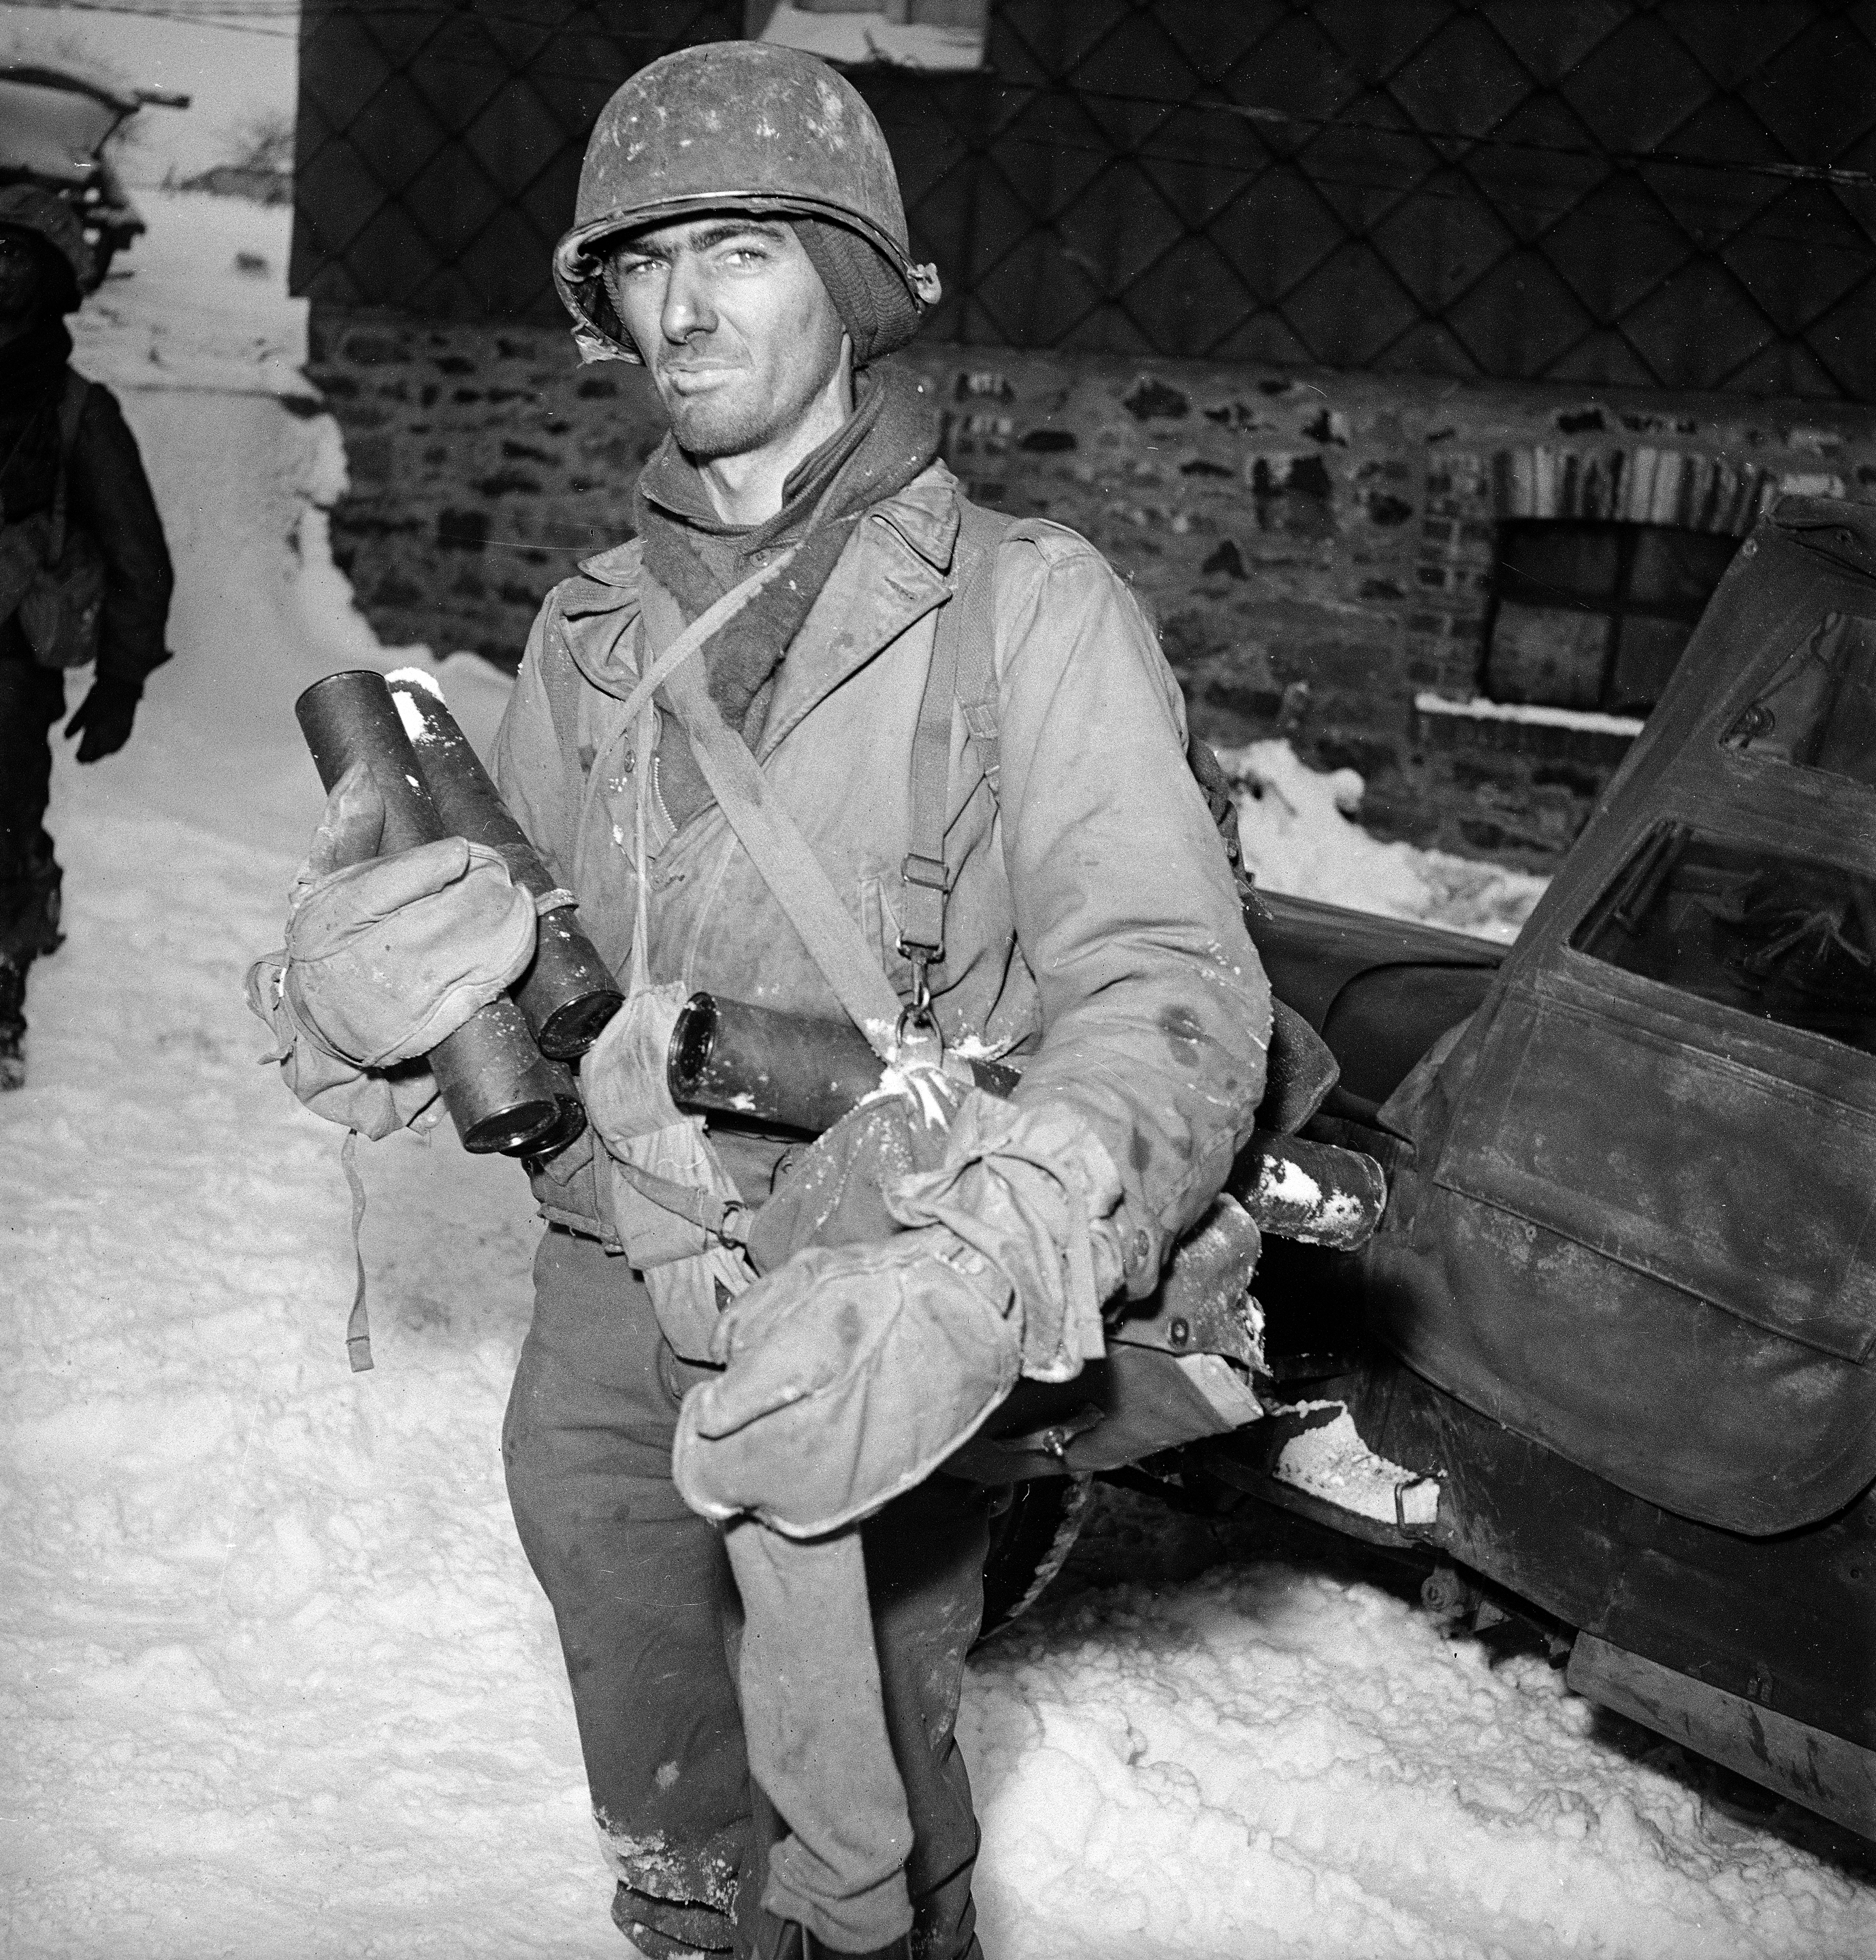 A tired American soldier just back from the front lines during the Battle of the Bulge, December 1944.